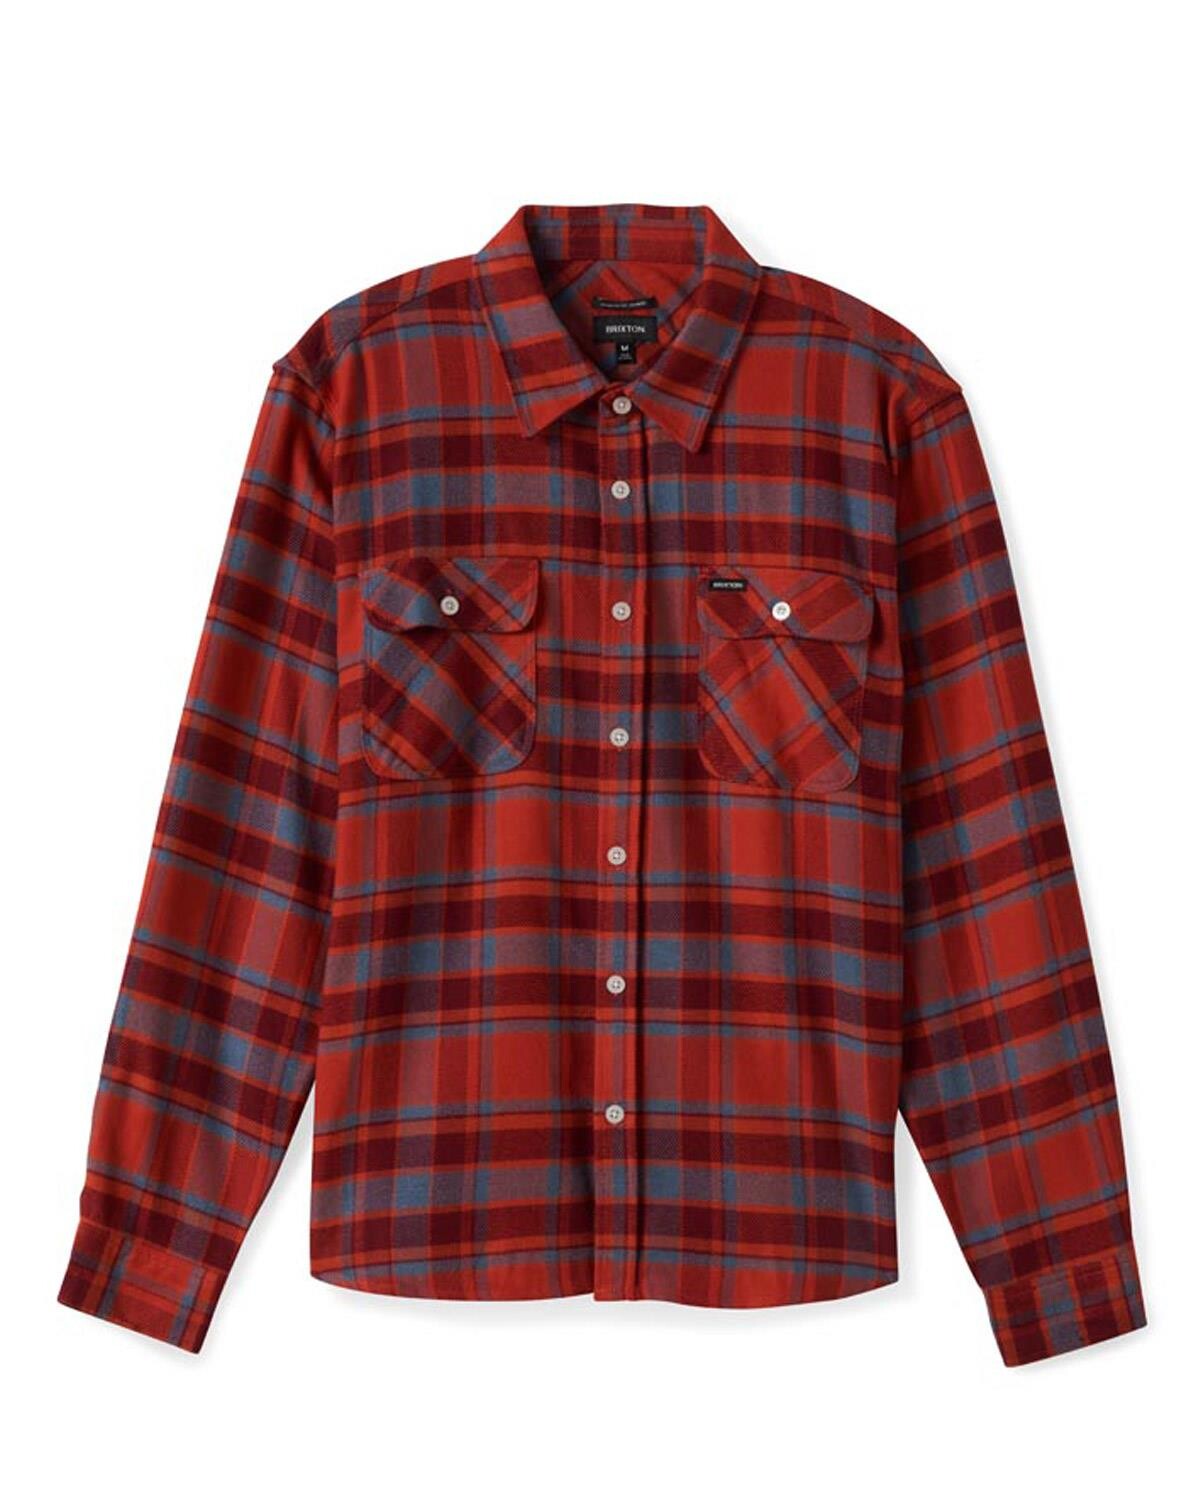 Brixton Bowery L/S Flannel (Burned Red, M) (888588845882)